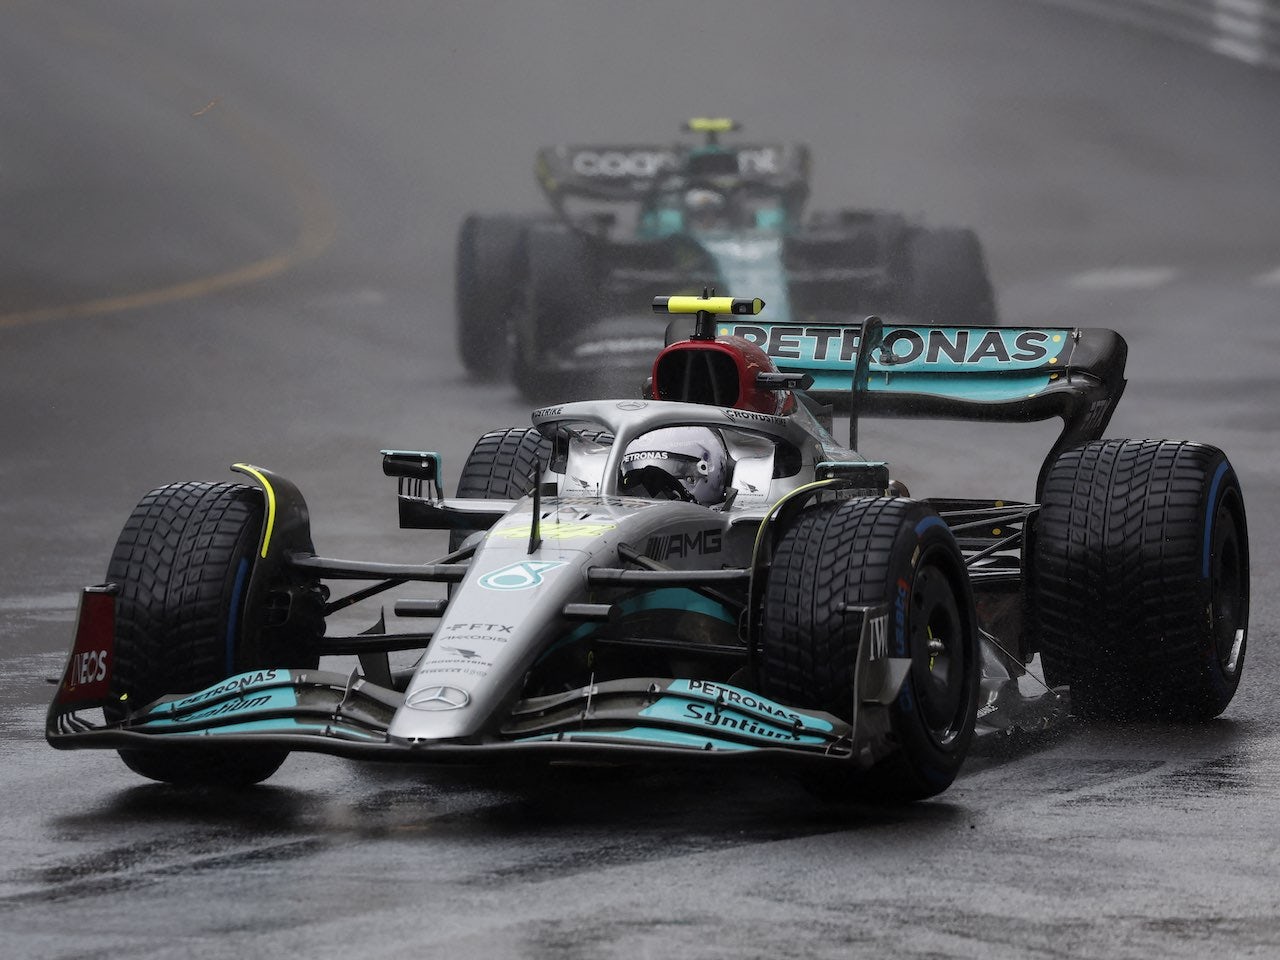 Power cuts could red-flag Monaco GP